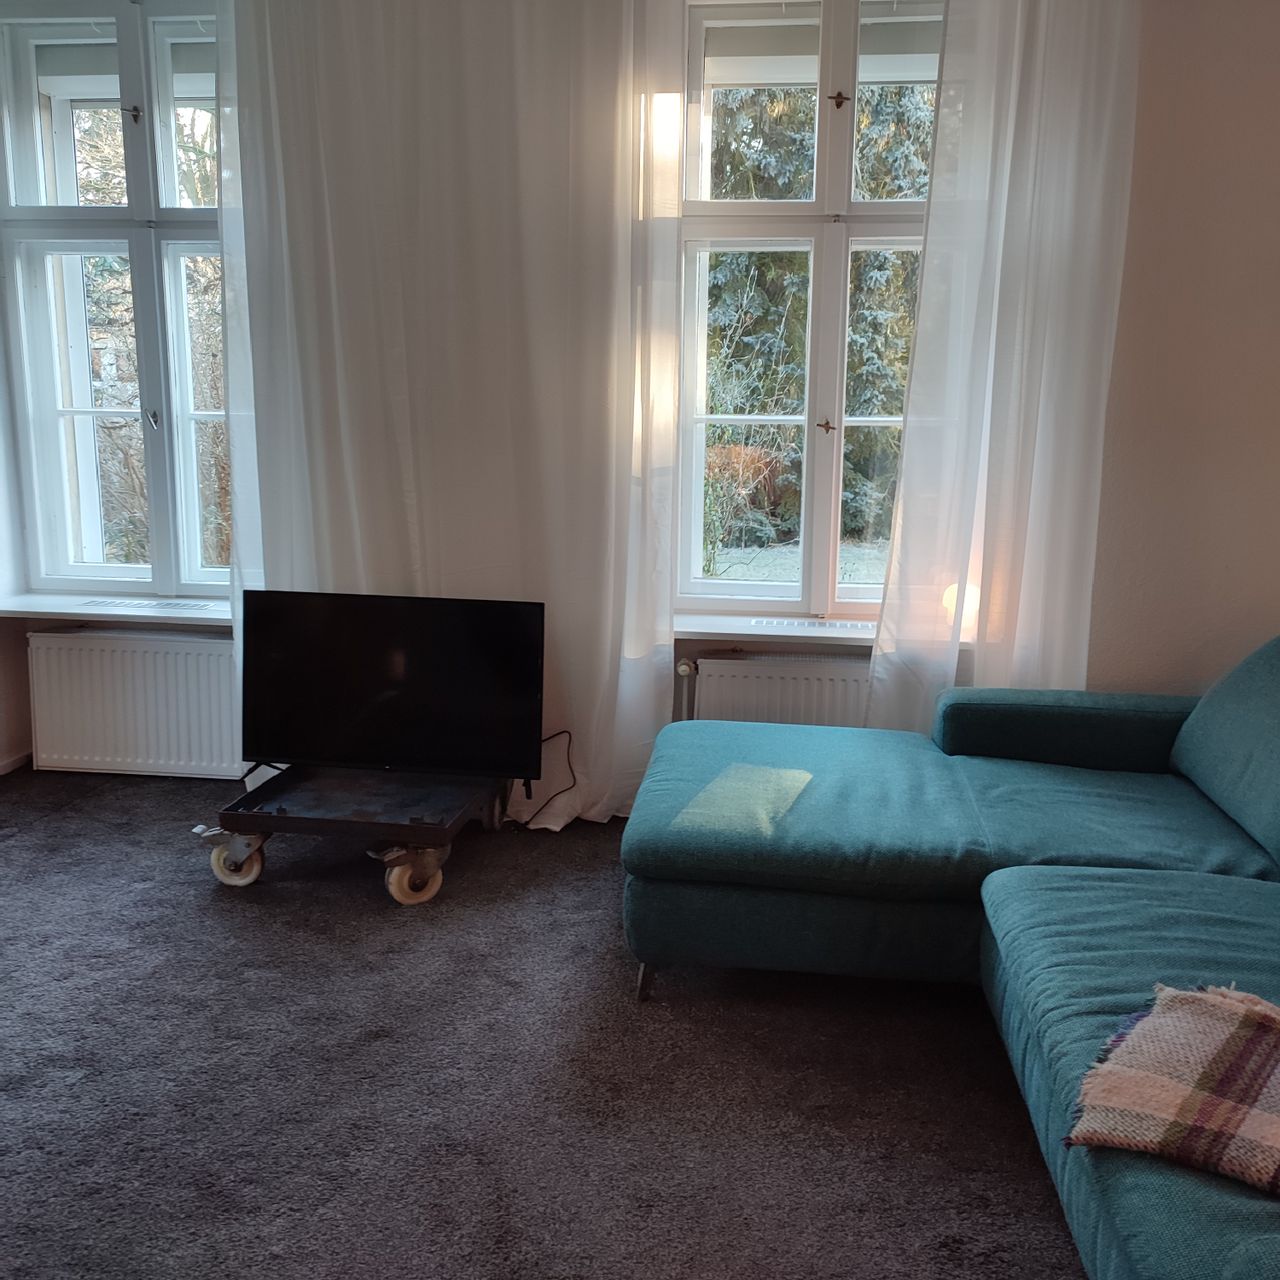 Modern furnished apartment in the old manor house of Berlin-Hermsdorf with small garden area